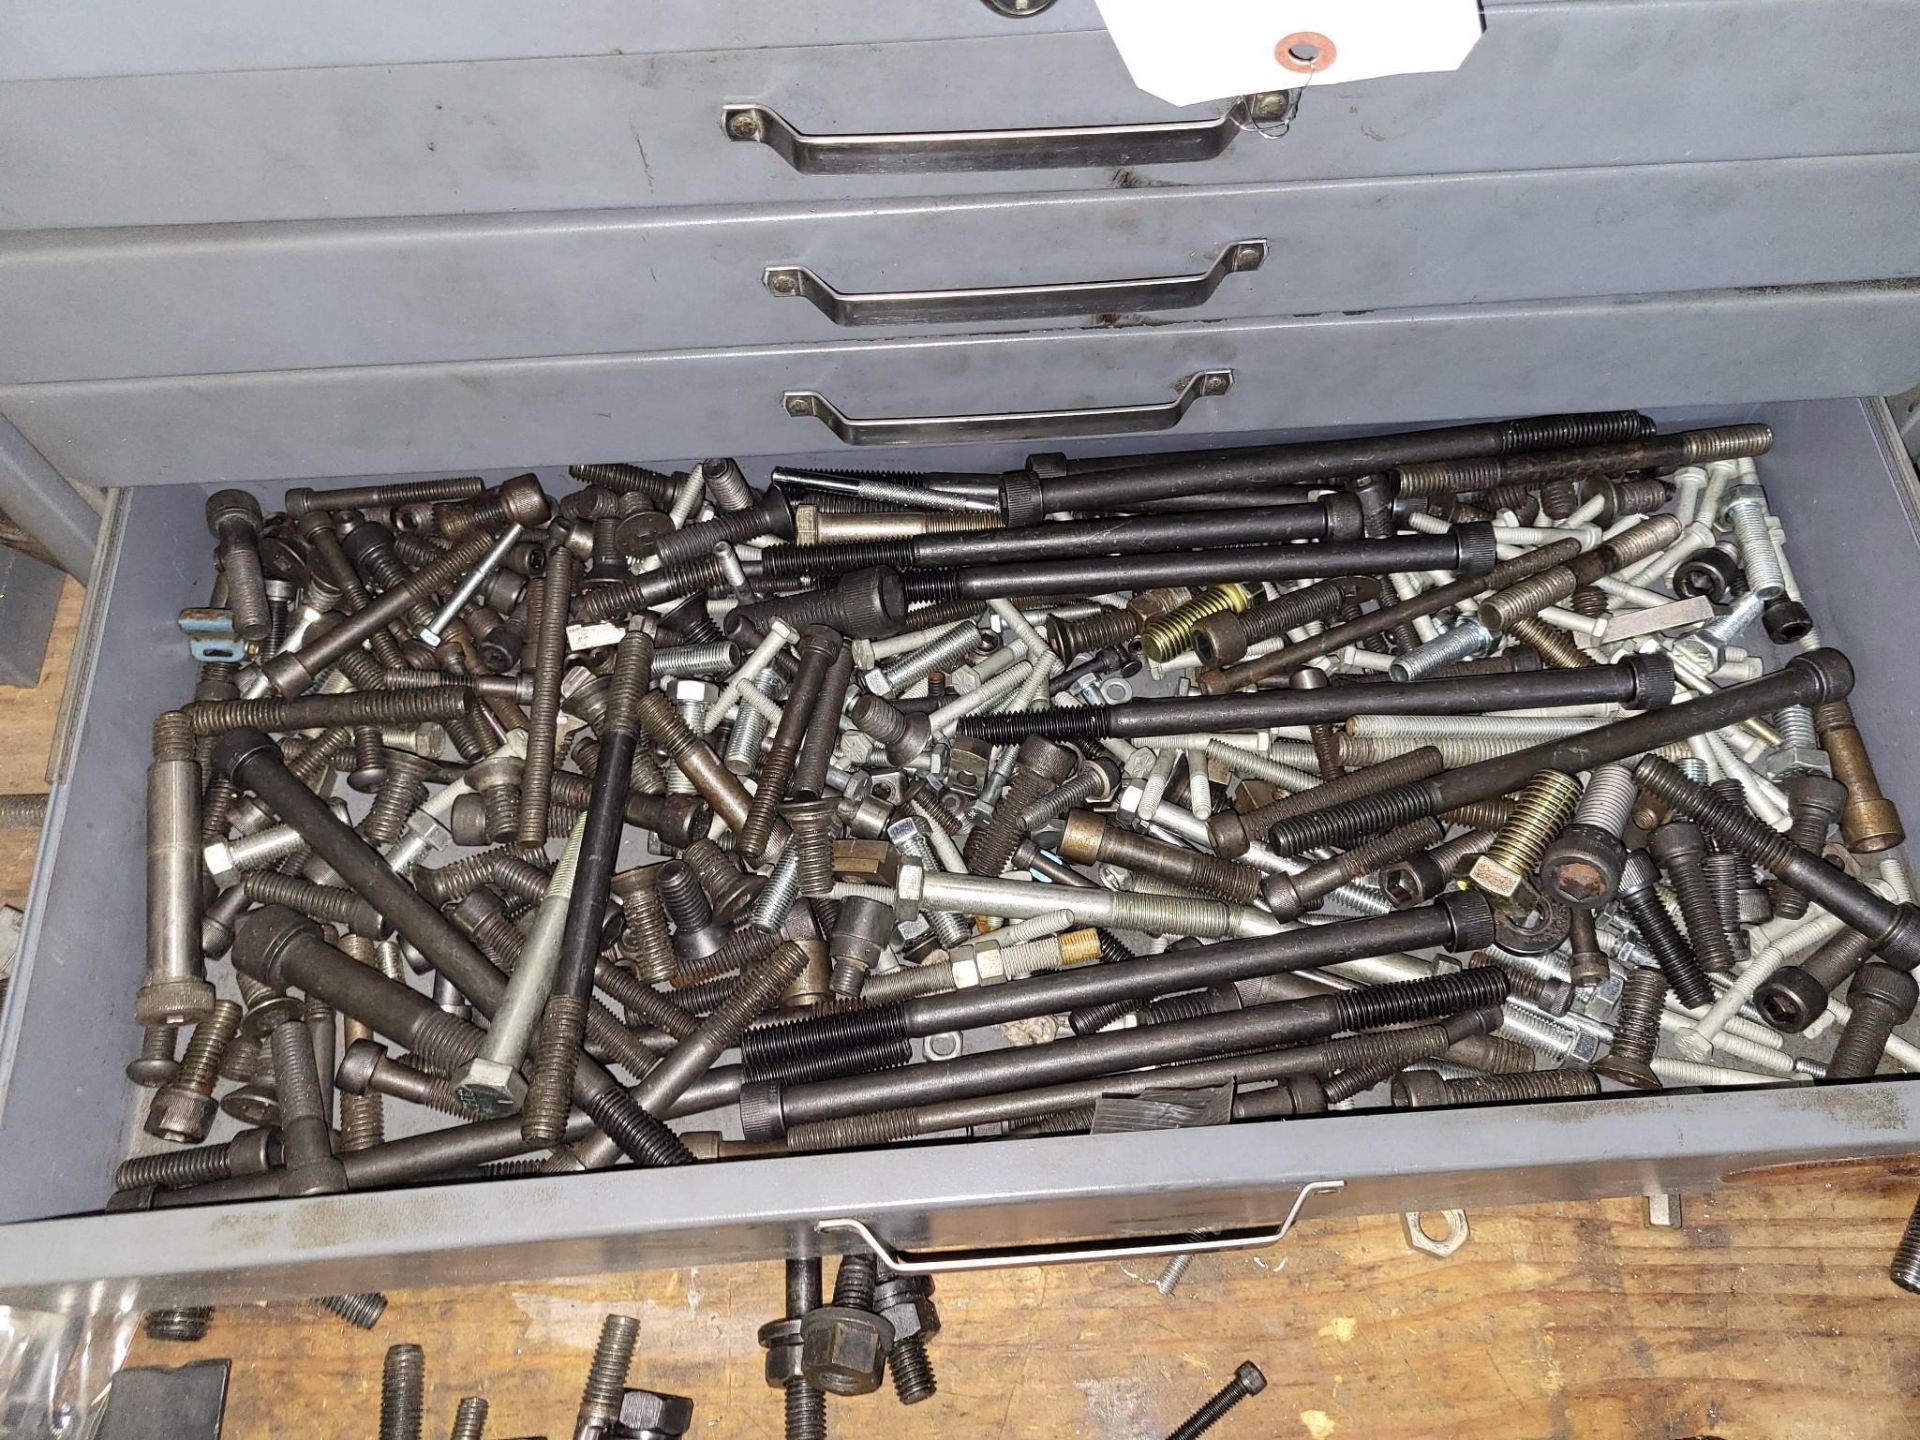 LARGE LOT OF MILLING TOOLS, TAPS, CARBIDE INSERTS, SETUP HARDWARE AND HAND TOOLS - Image 20 of 24